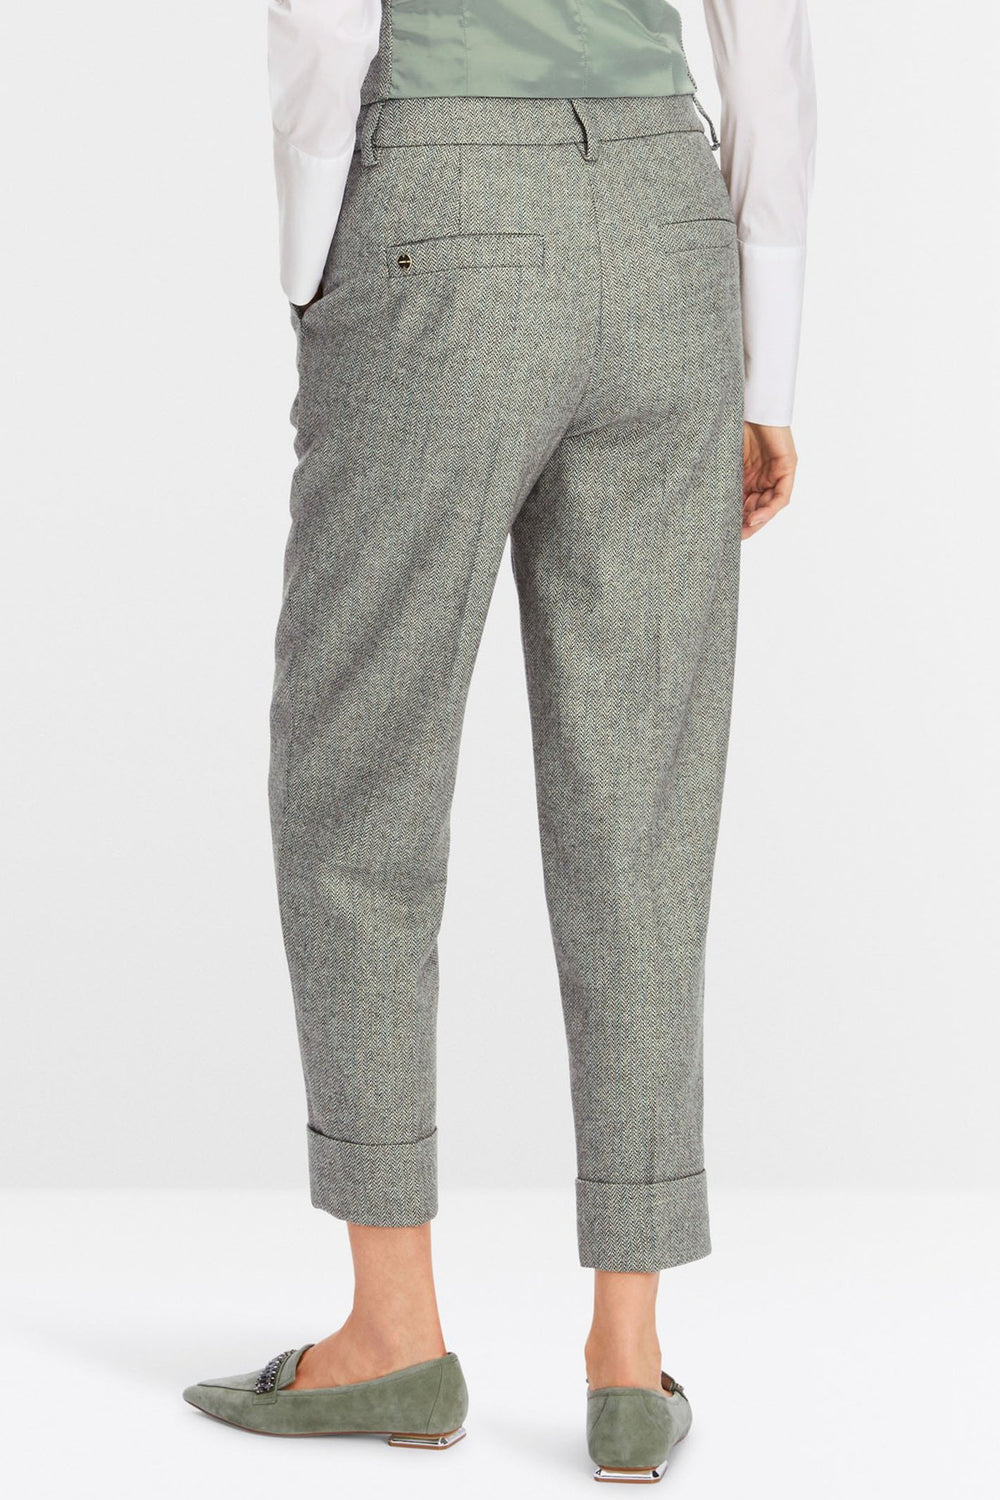 Marc Cain Collection XC 81.17 W27 Frozen Sage Green Trousers - Olivia Grace Fashion